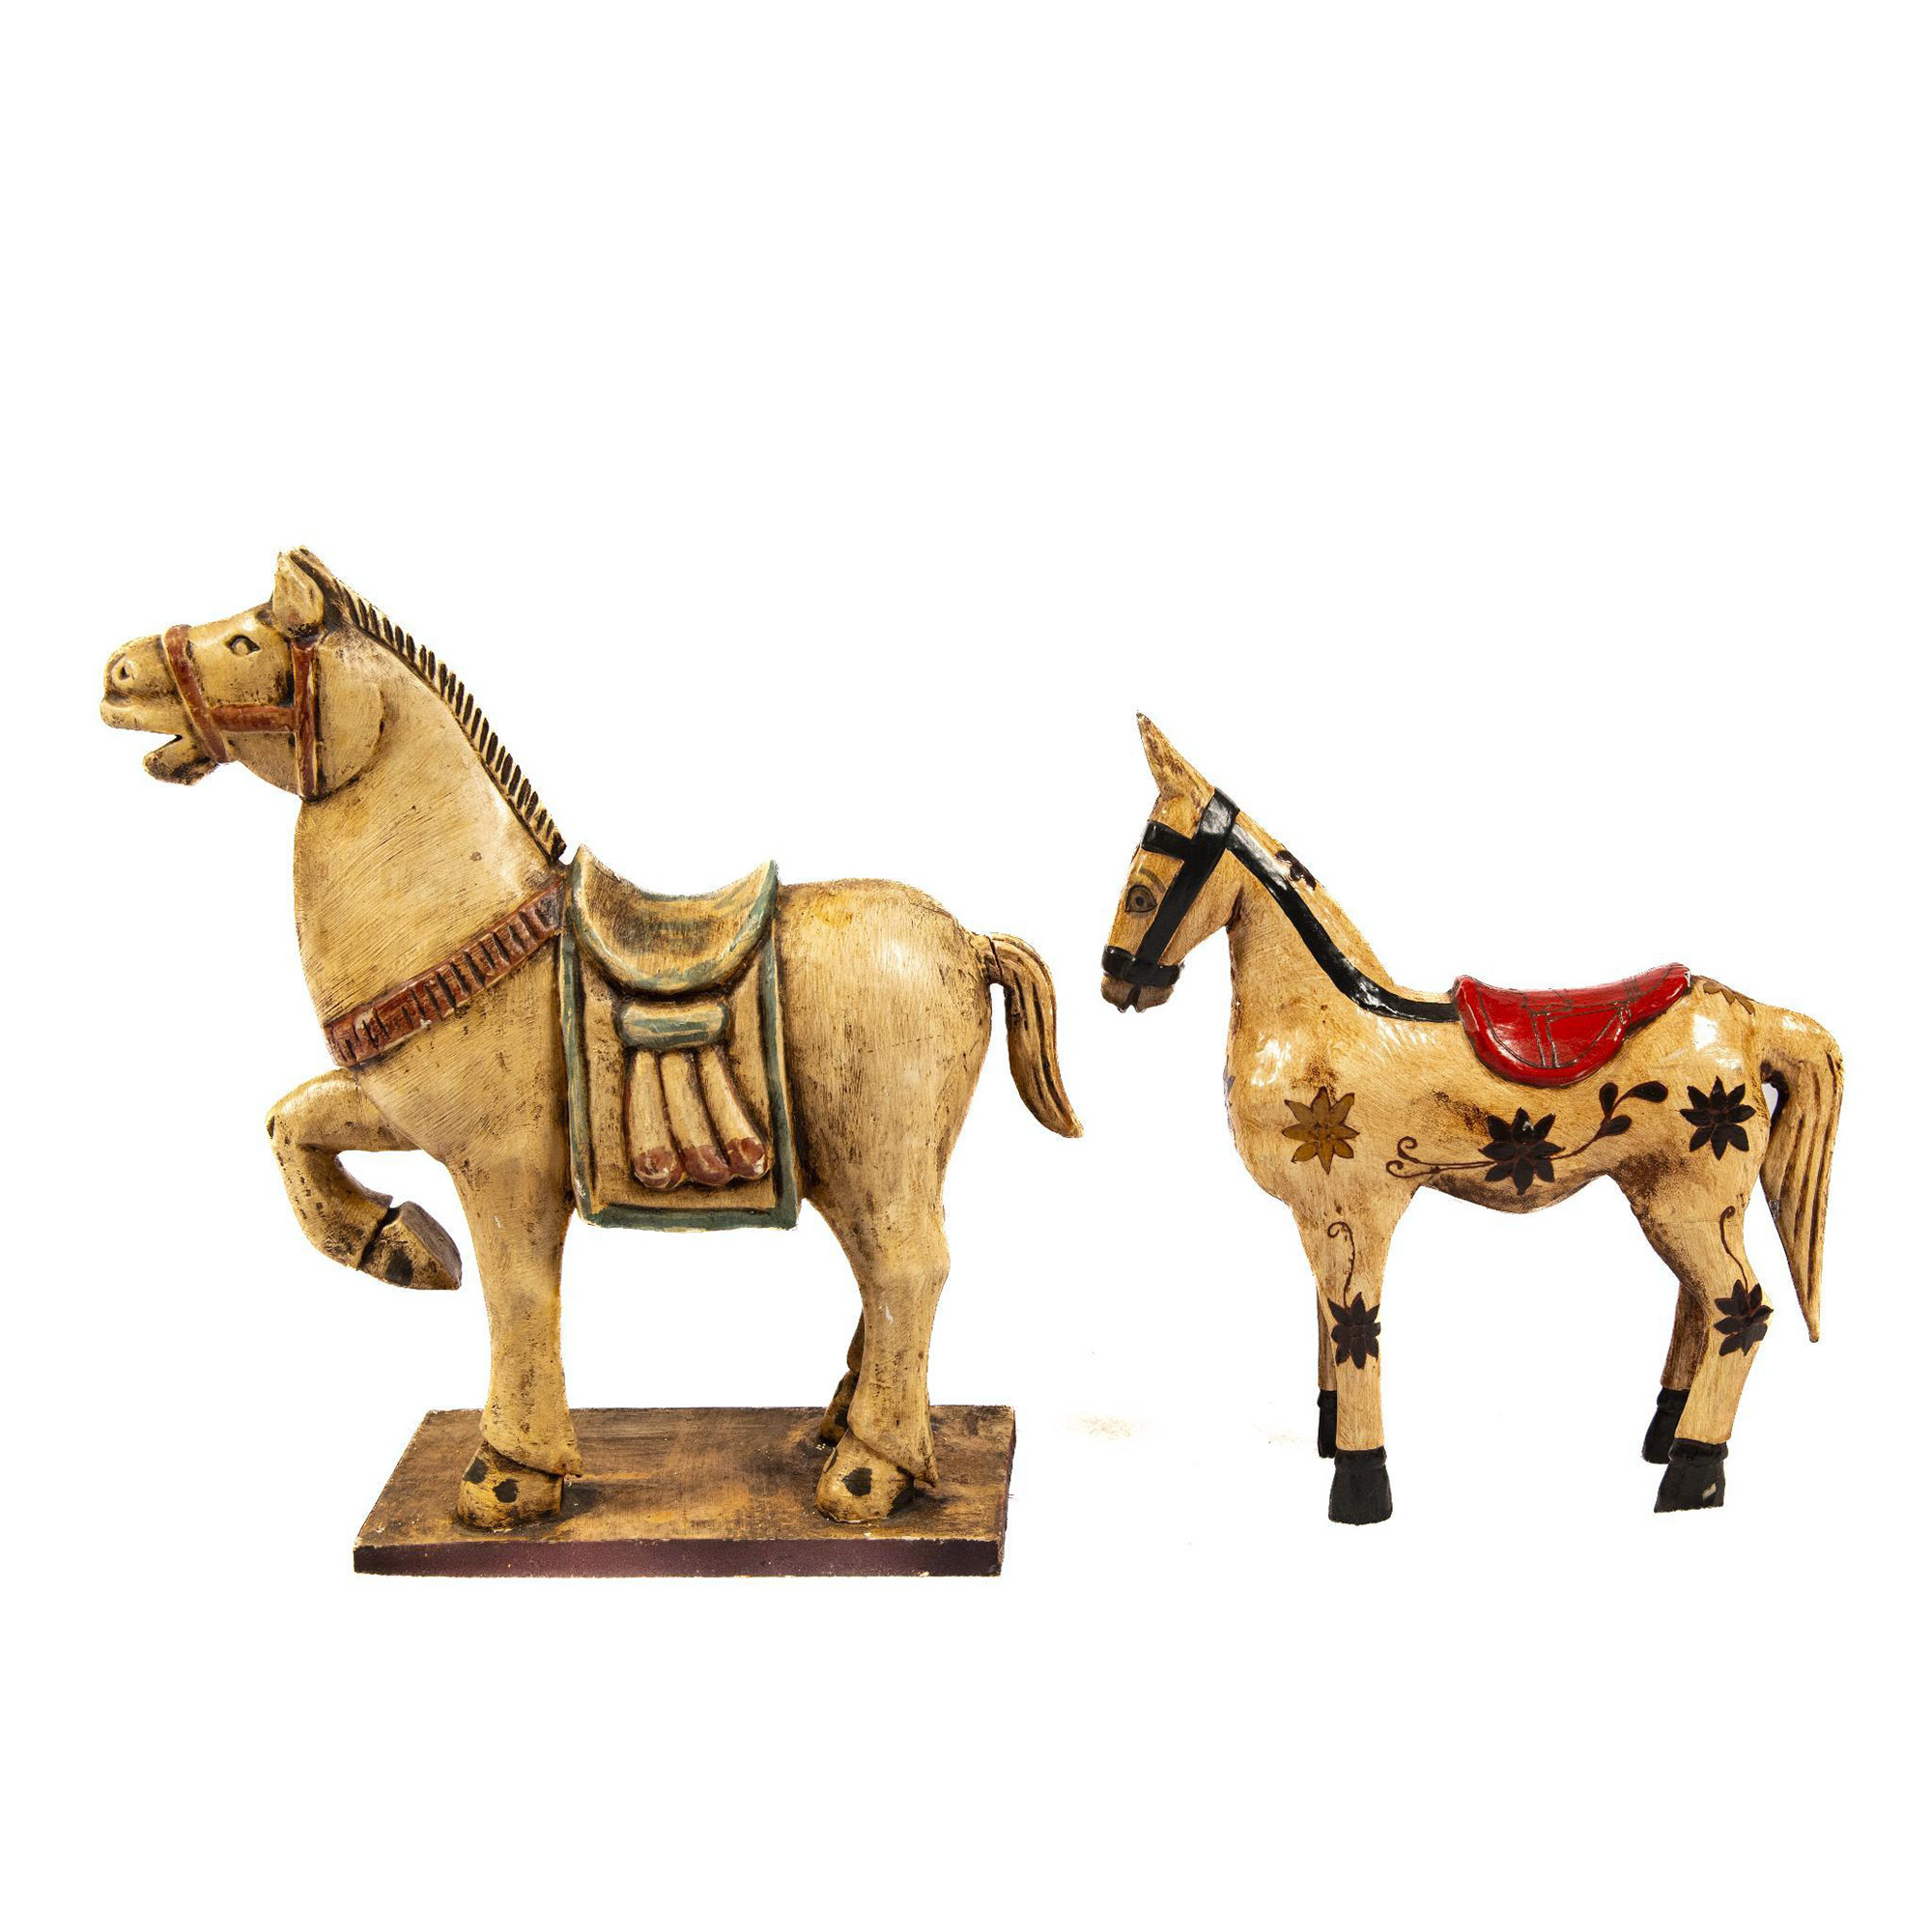 Pair of Decorative Painted Wooden Horses - Image 2 of 5